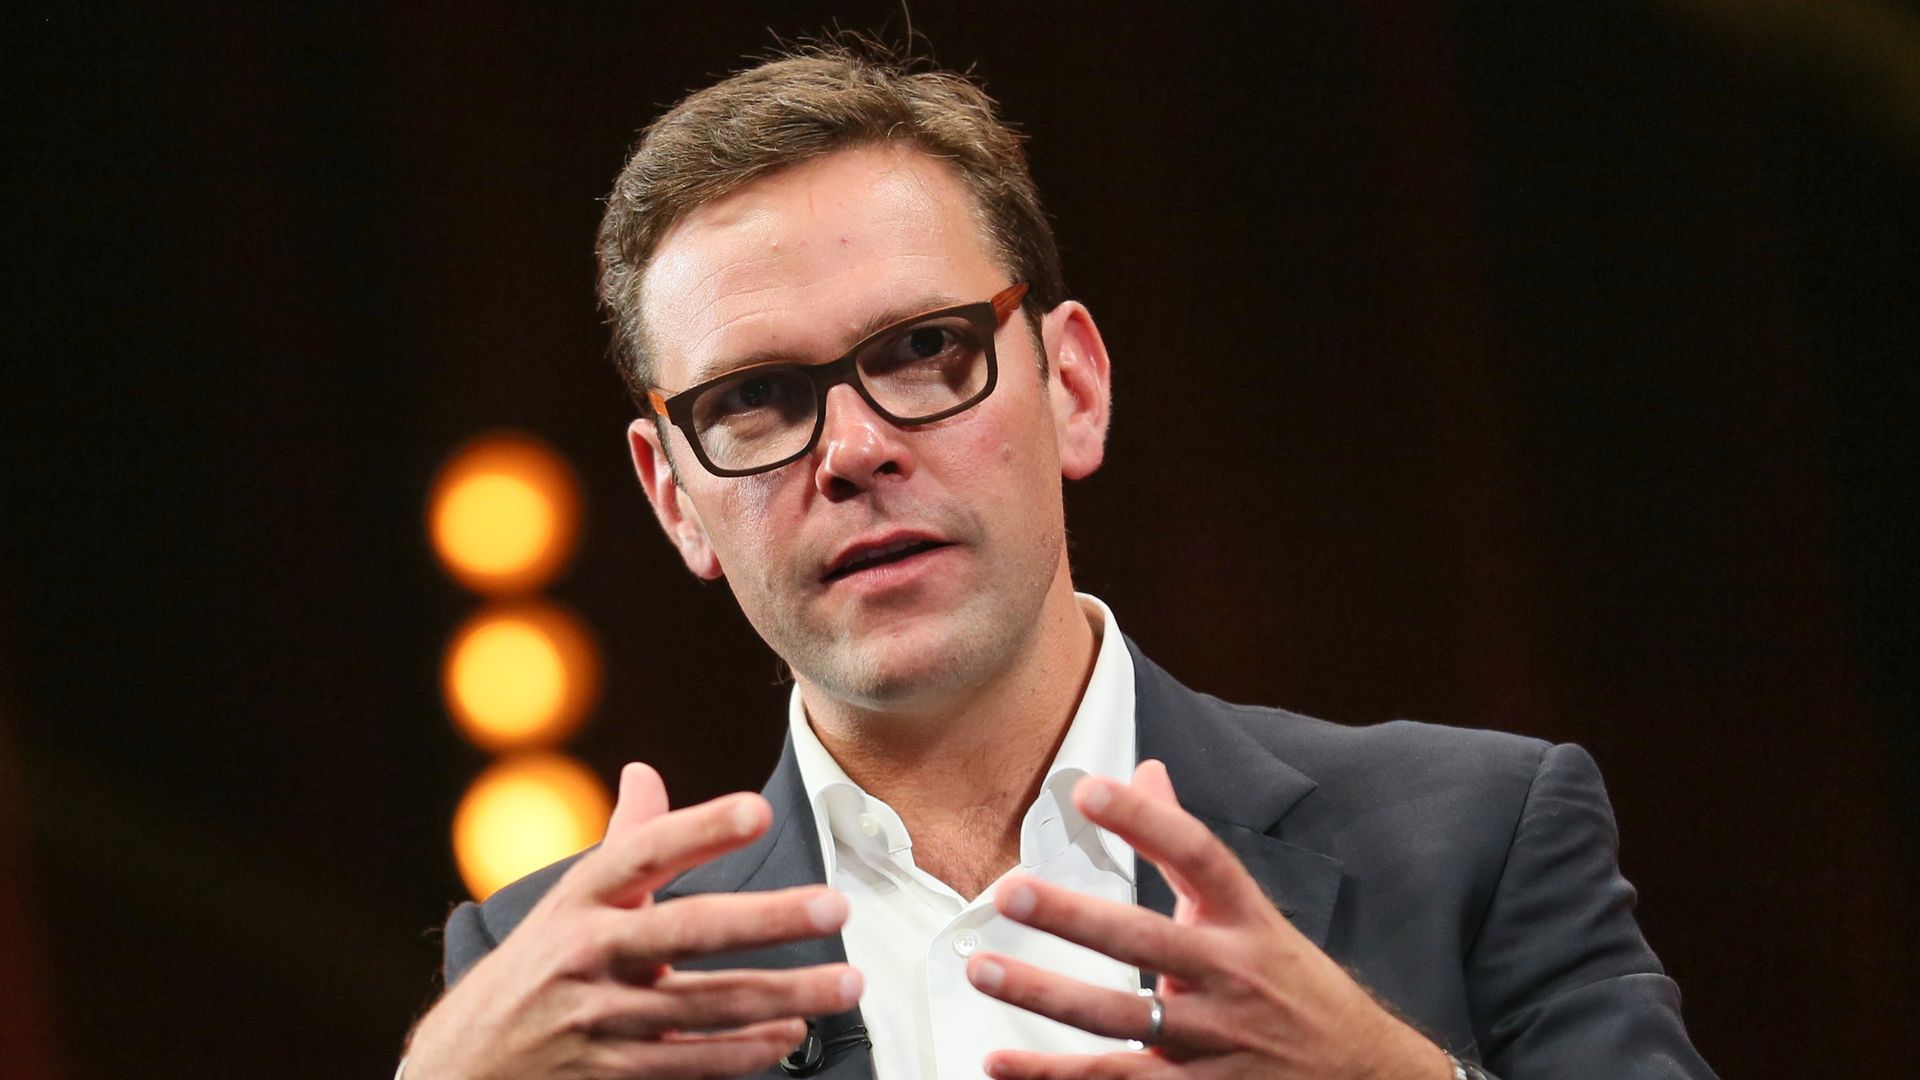 James Murdoch at a keynote in Cannes, France.